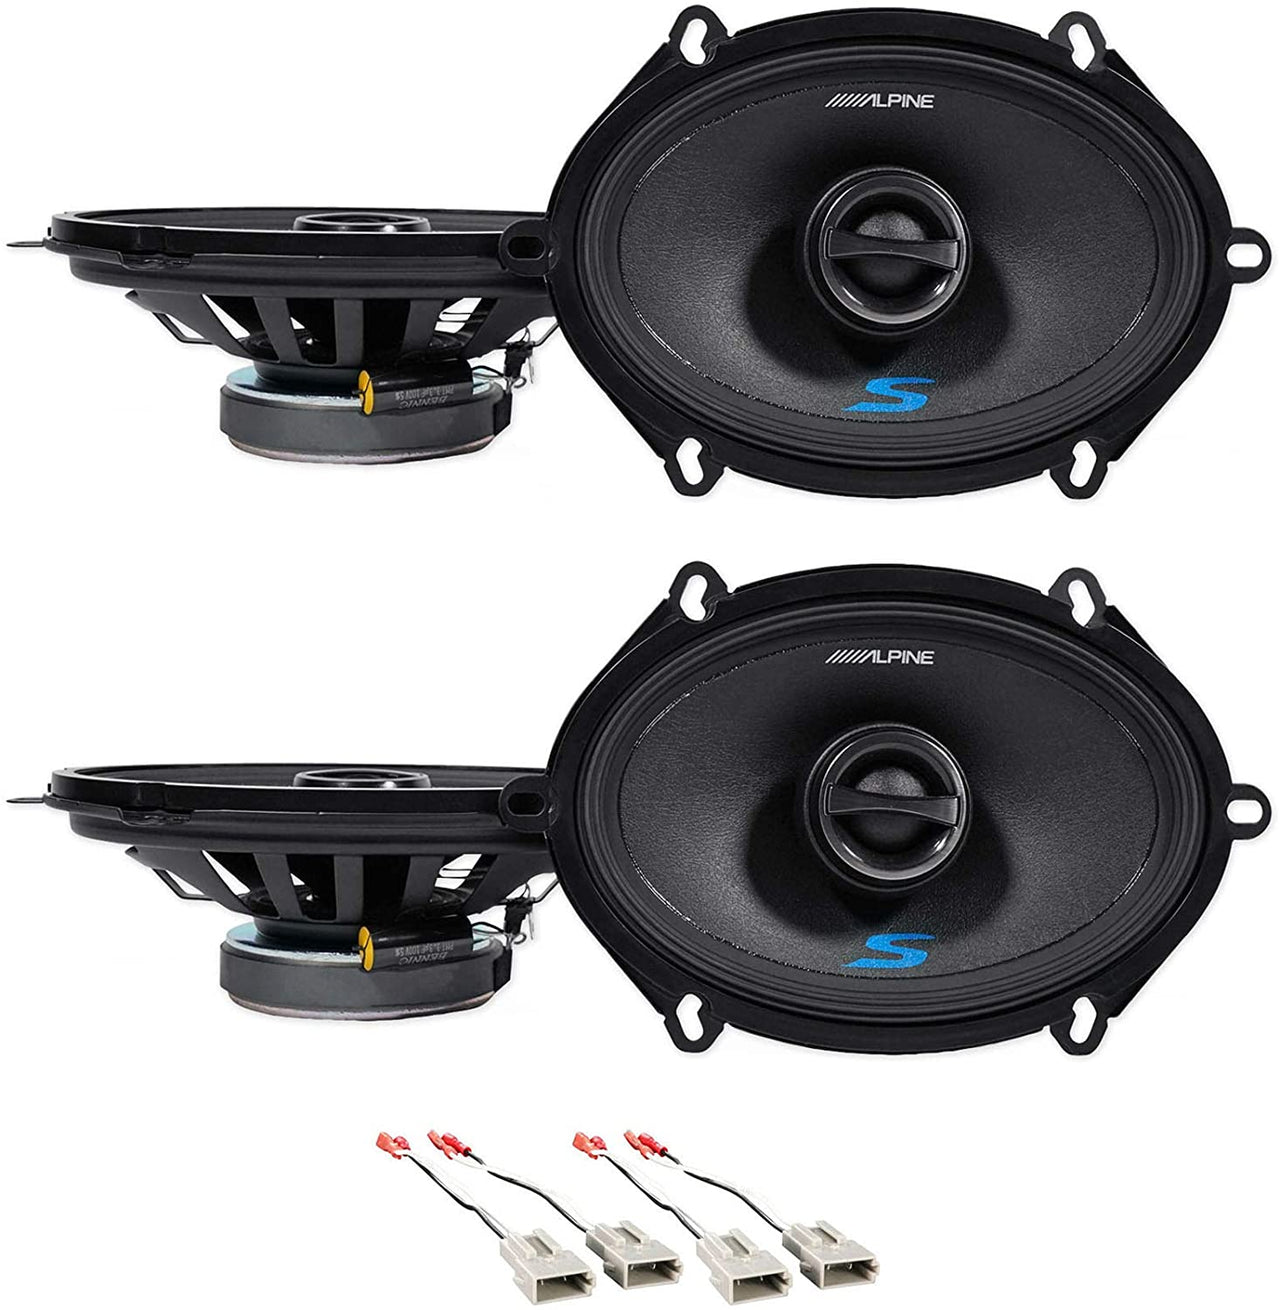 2 Pair ALPINE S-S57 230 Watt 5x7" or 6x8" Coaxial 2-Way Car Audio Speakers Bundle With METRA 72-5512 Speaker Wire Harness Connector Compatible With 1987-Up Ford